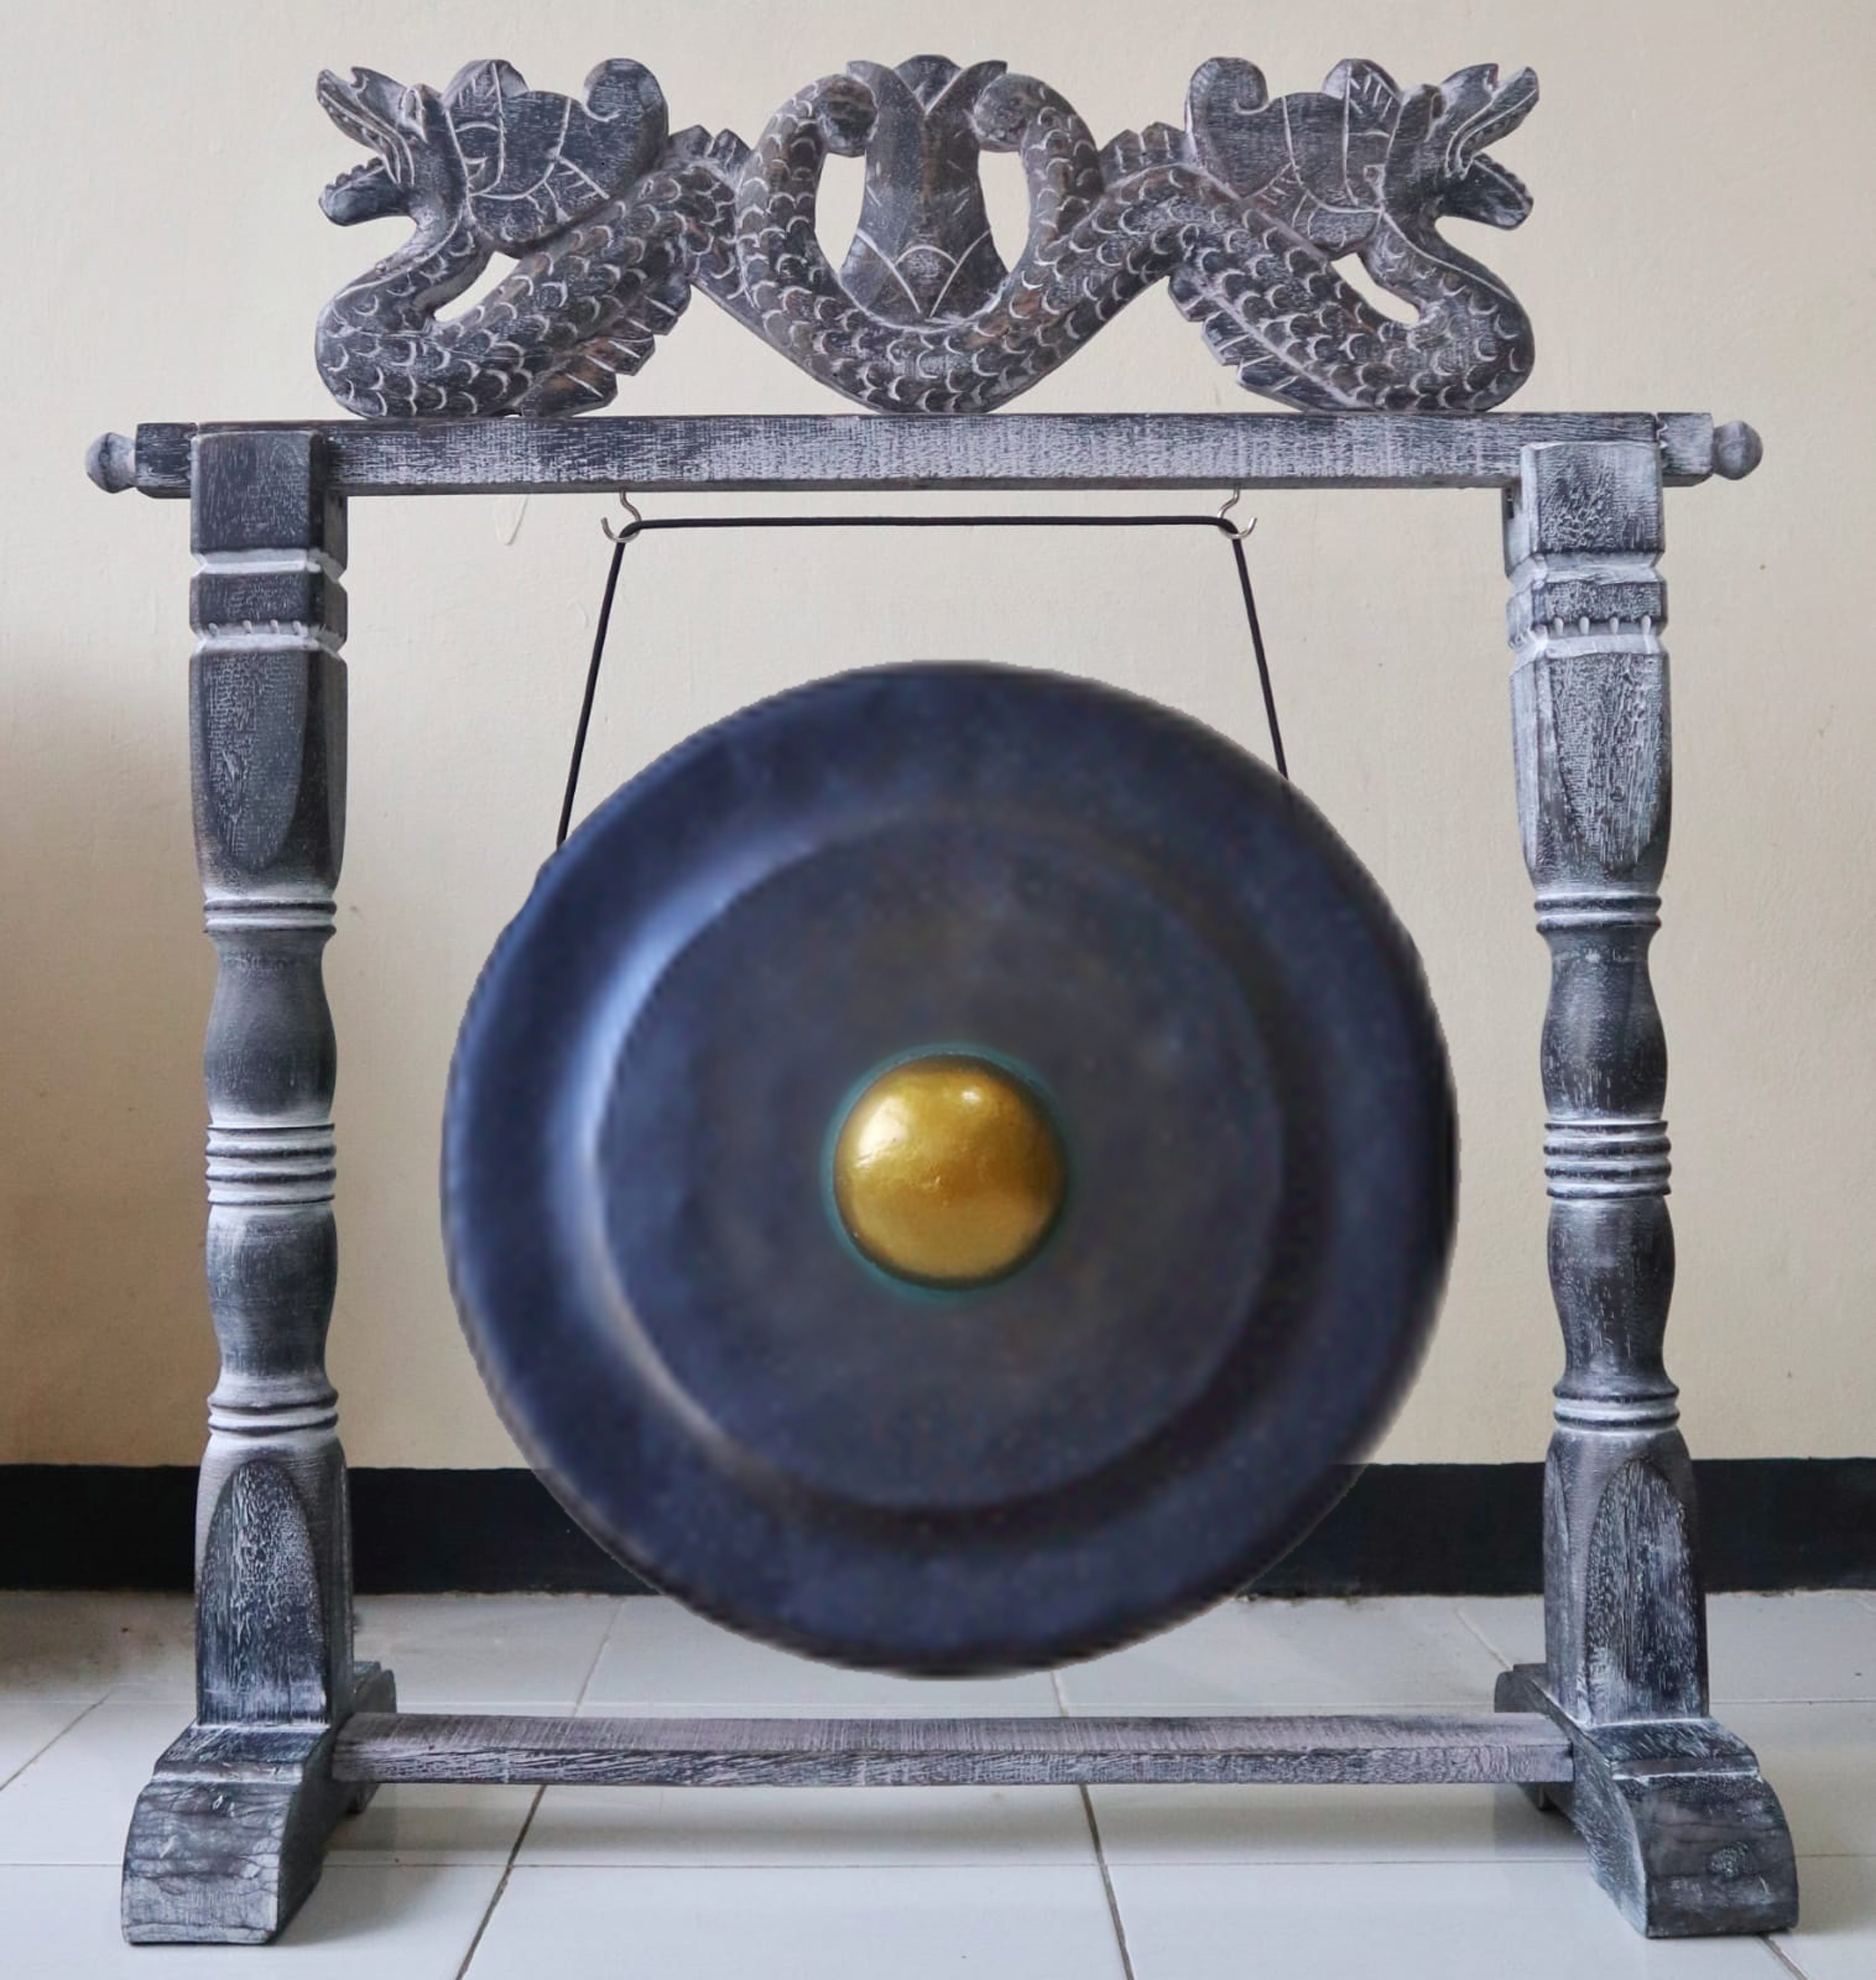 Large Healing Gong in an antique stand 31 inches